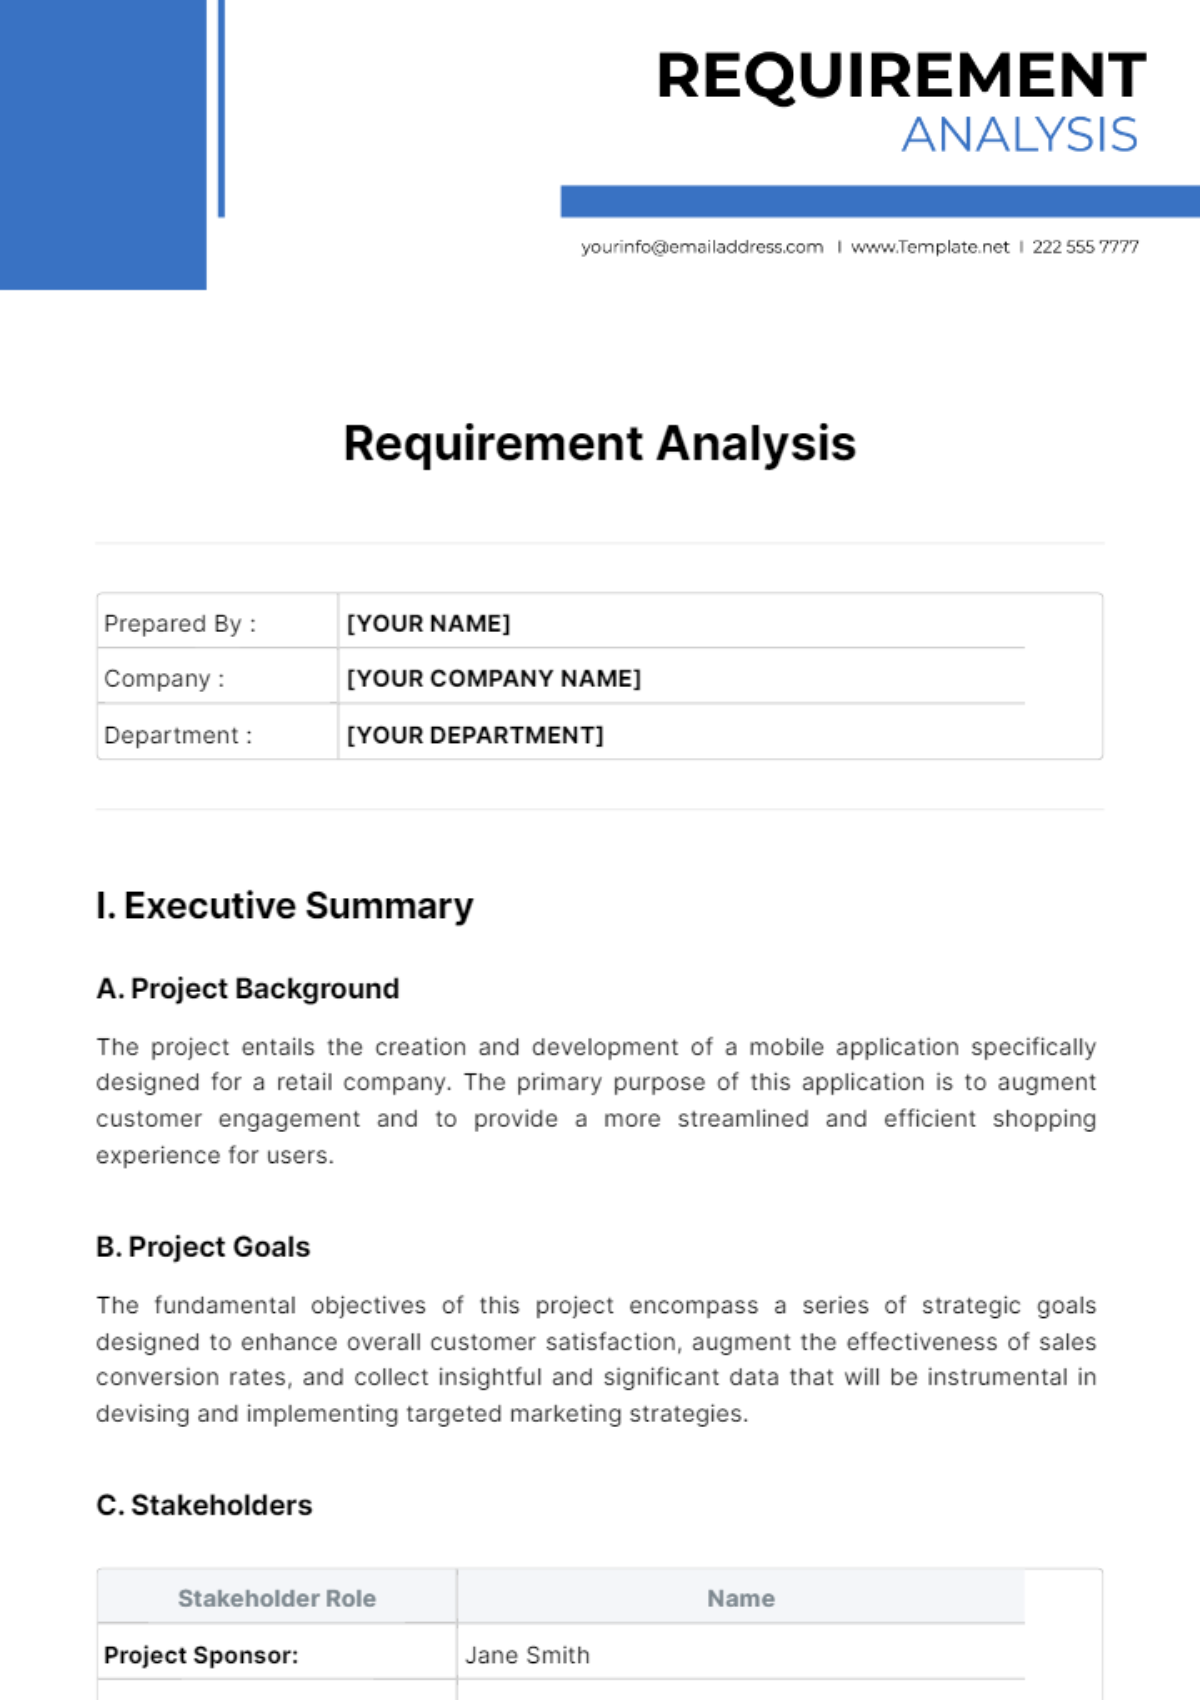 Requirement Analysis Template